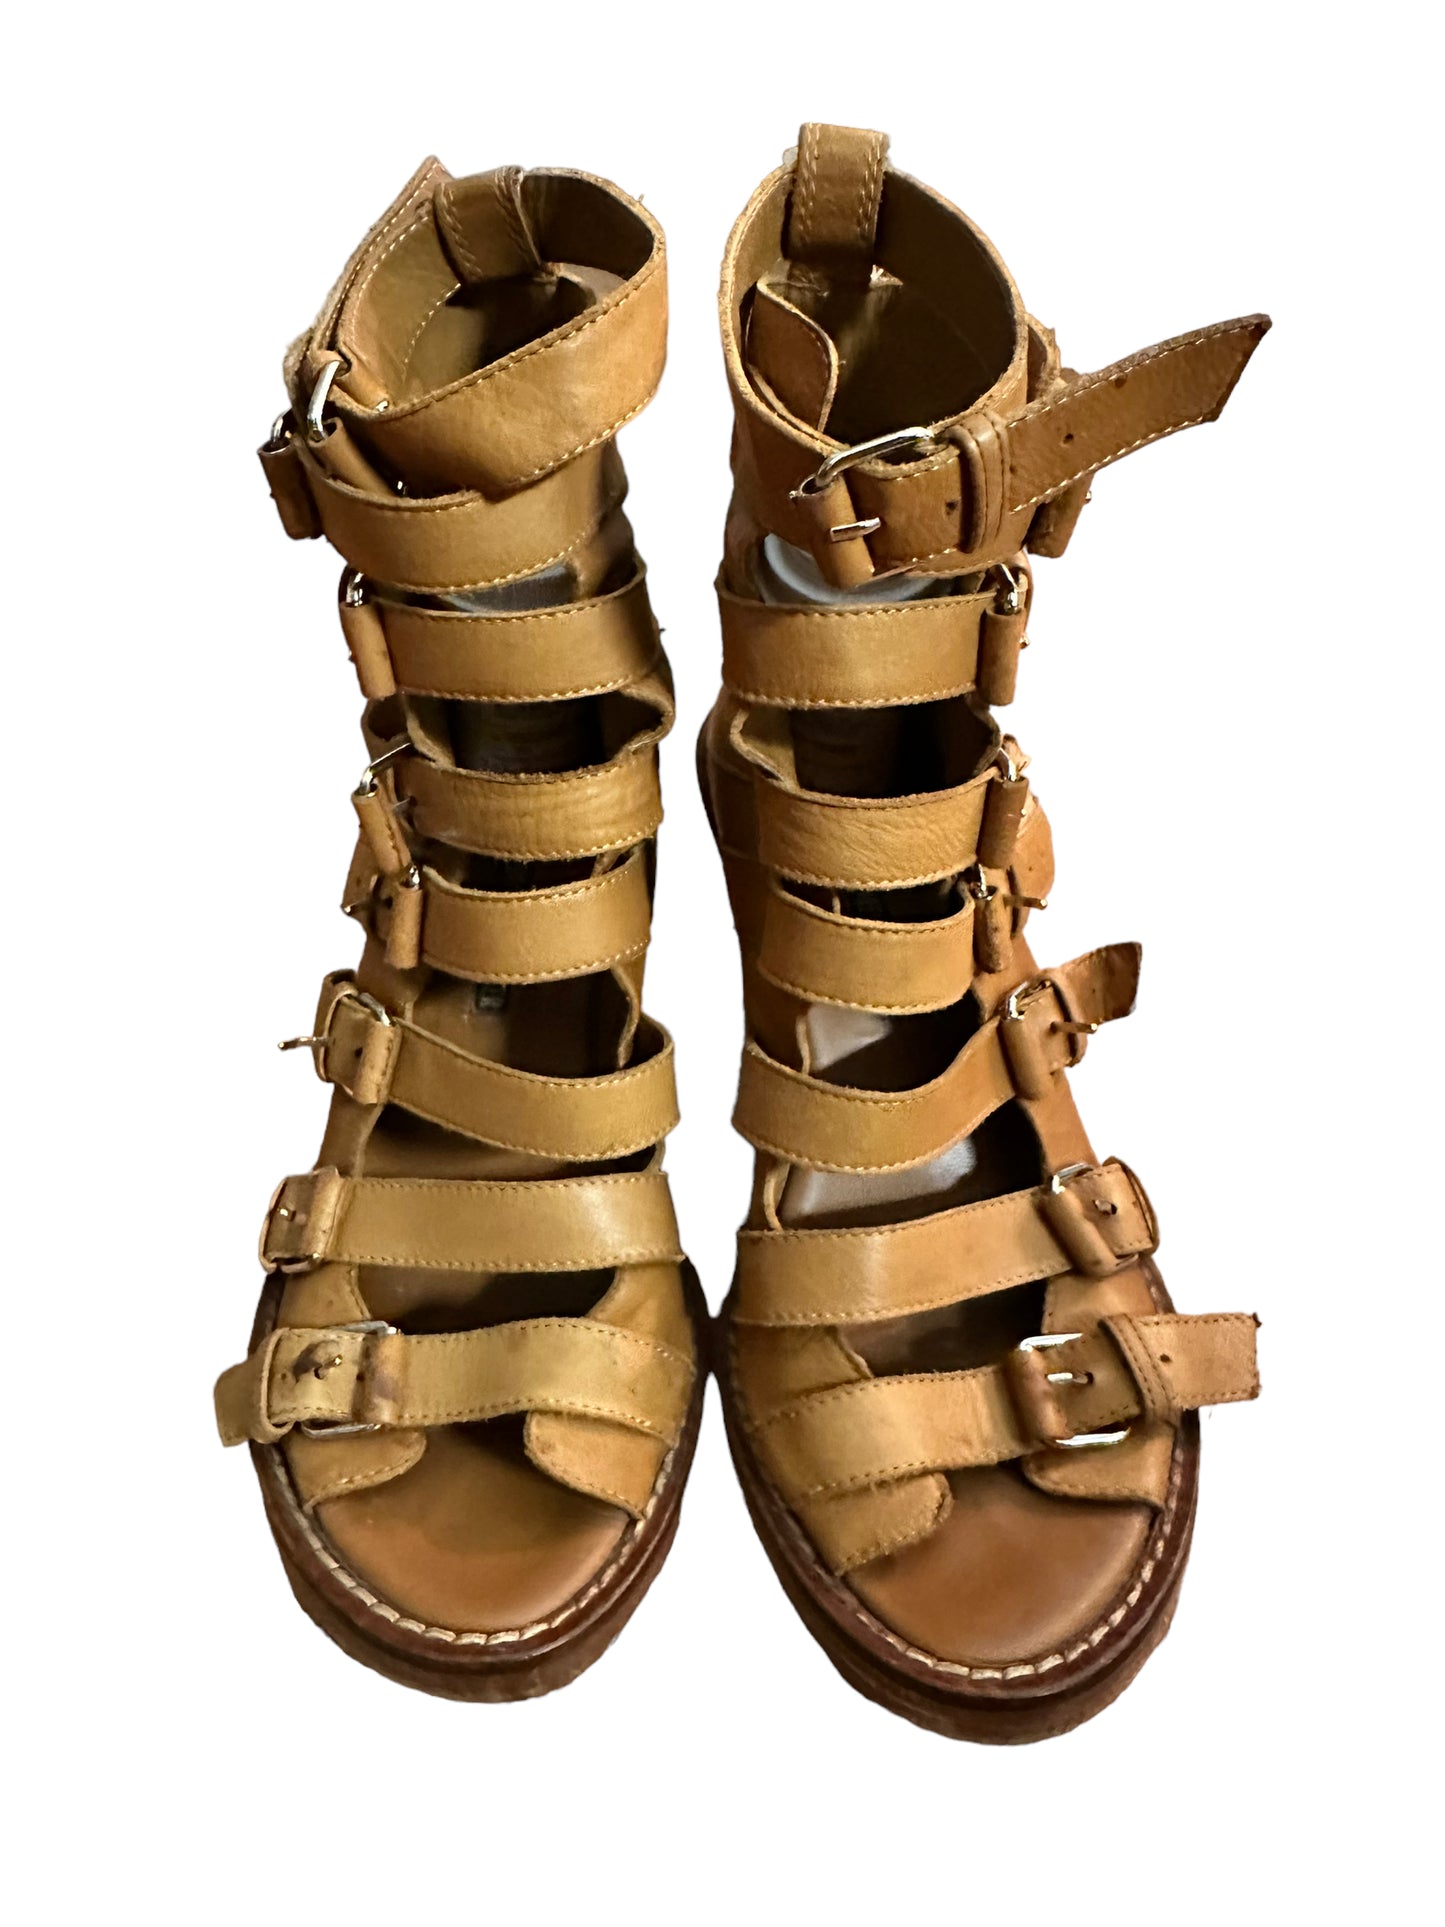 Ann Demeulemeester Camel Leather Strappy Wedges Size 37 (US 6)